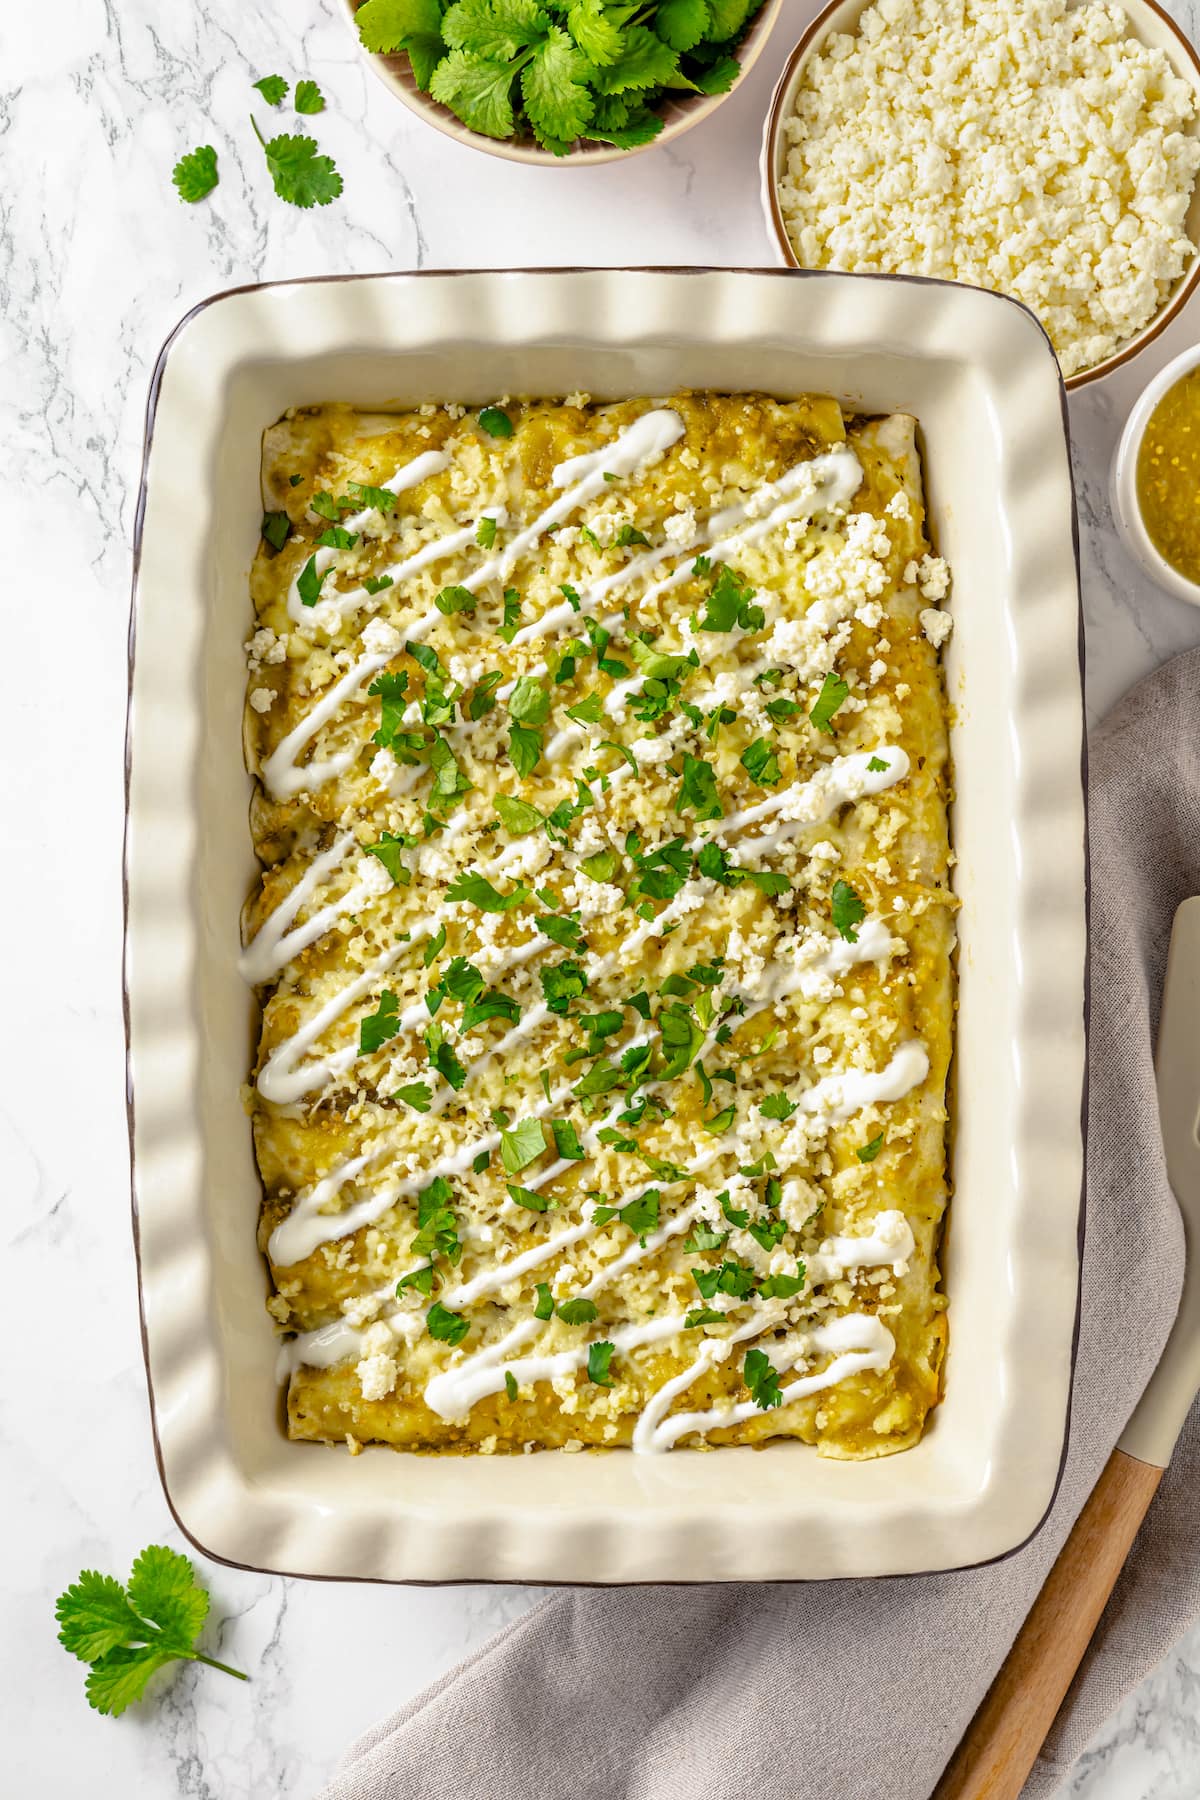 A casserole dish of enchilada verdes topped with sour cream and cilantro